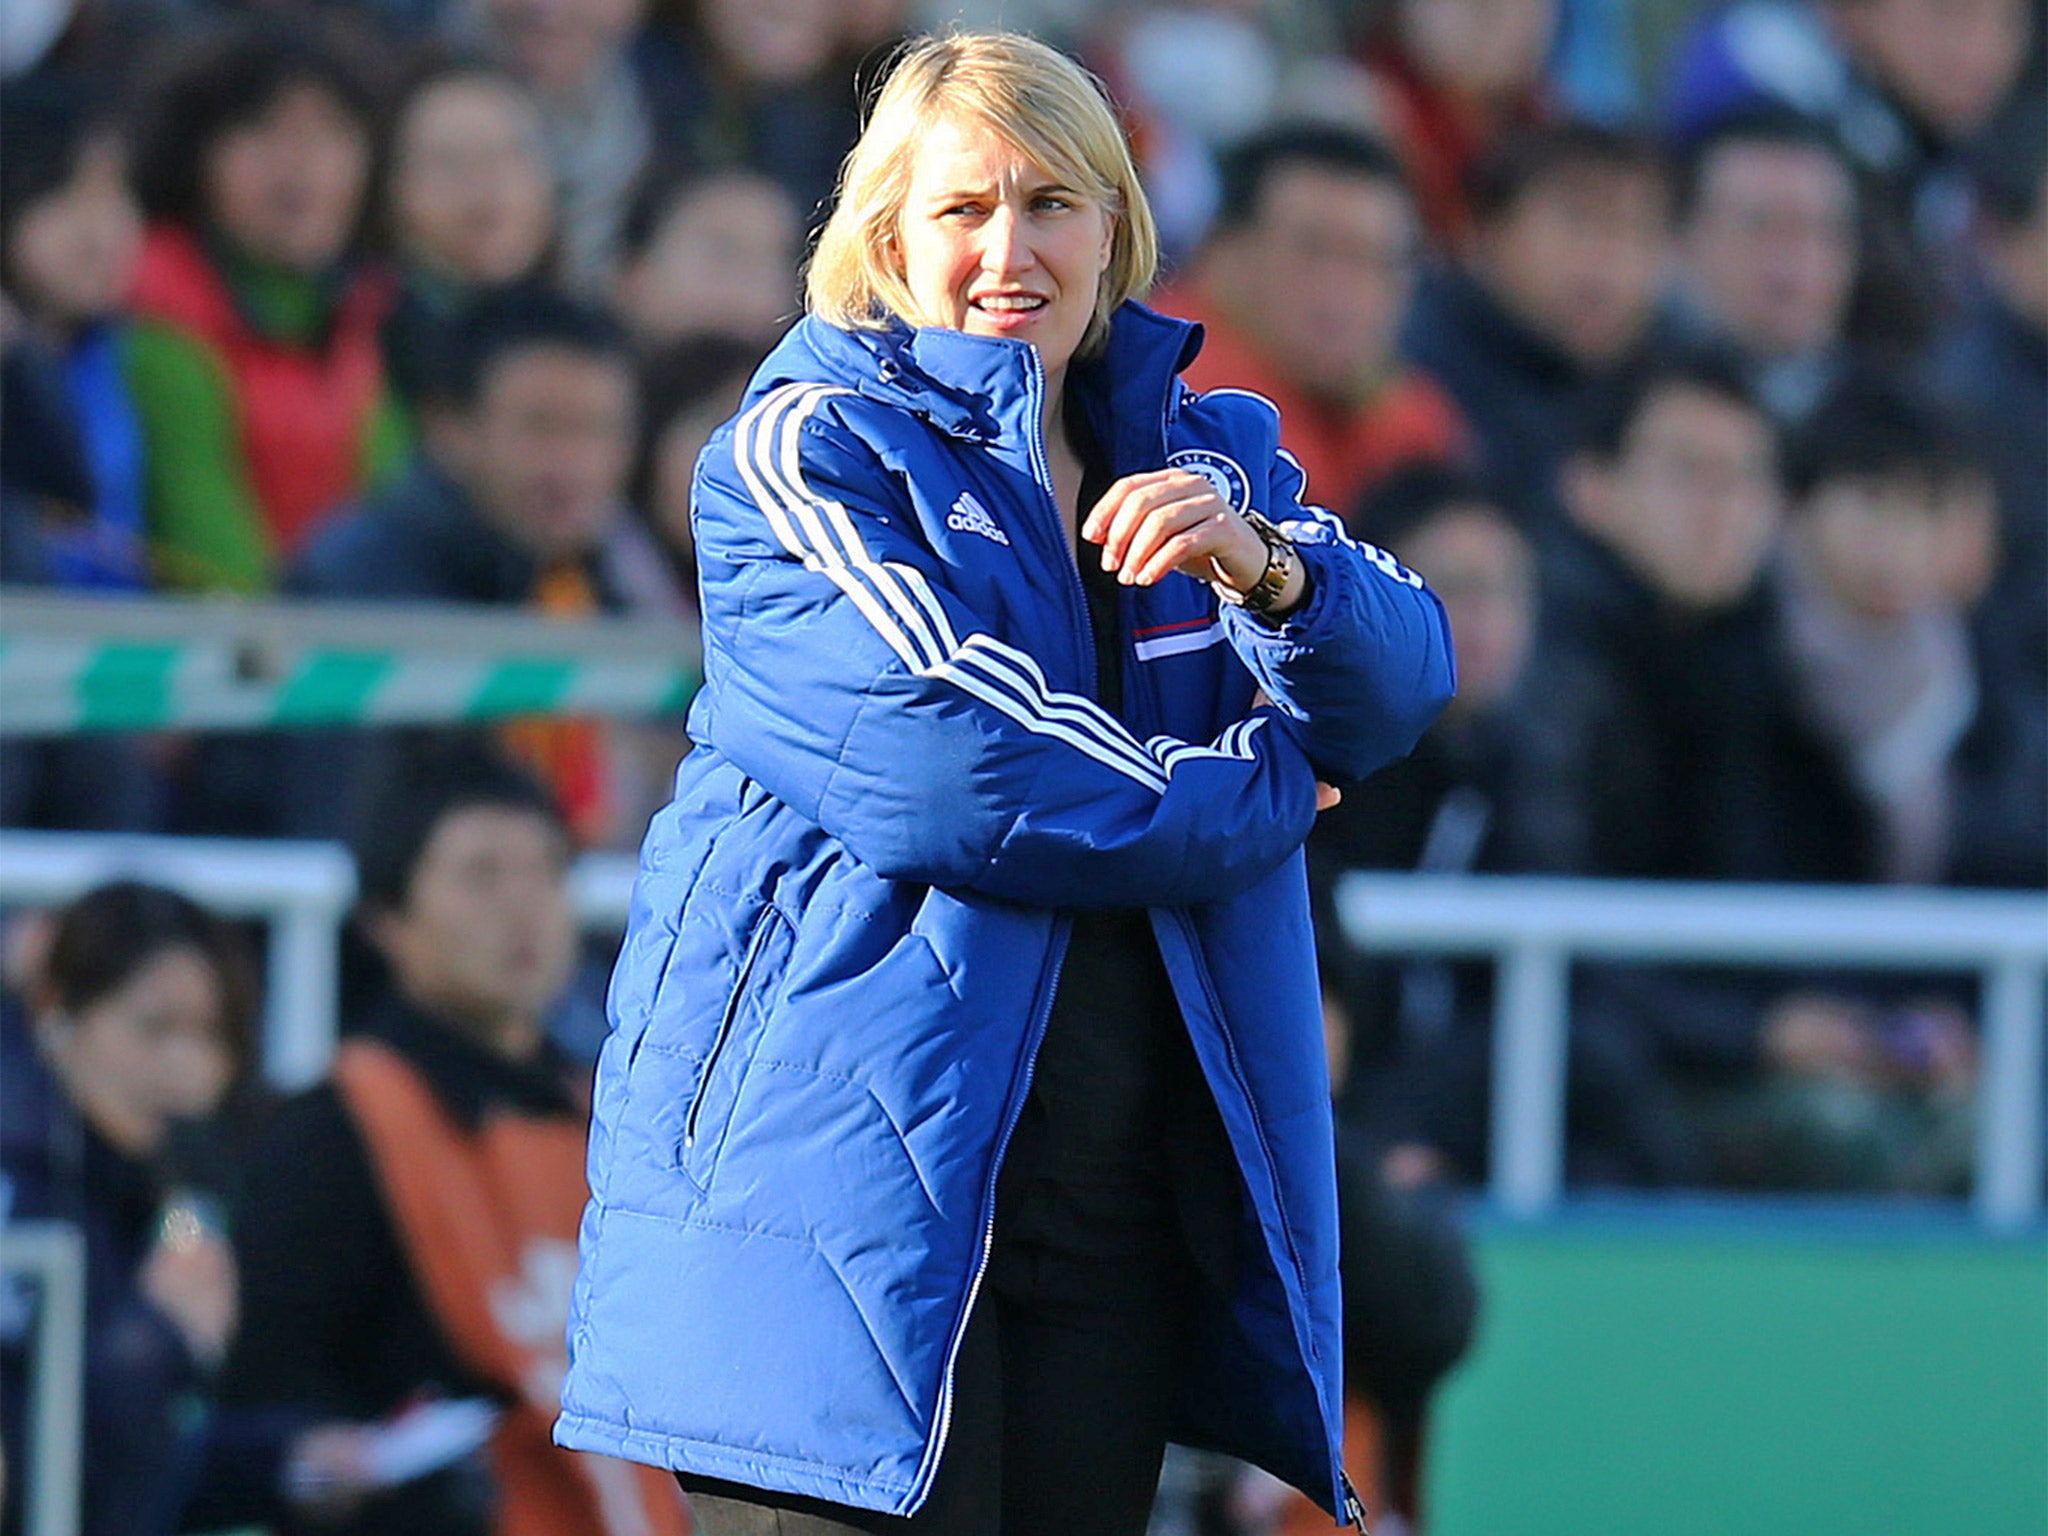 Chelsea’s Emma Hayes is the only female manager in WSL